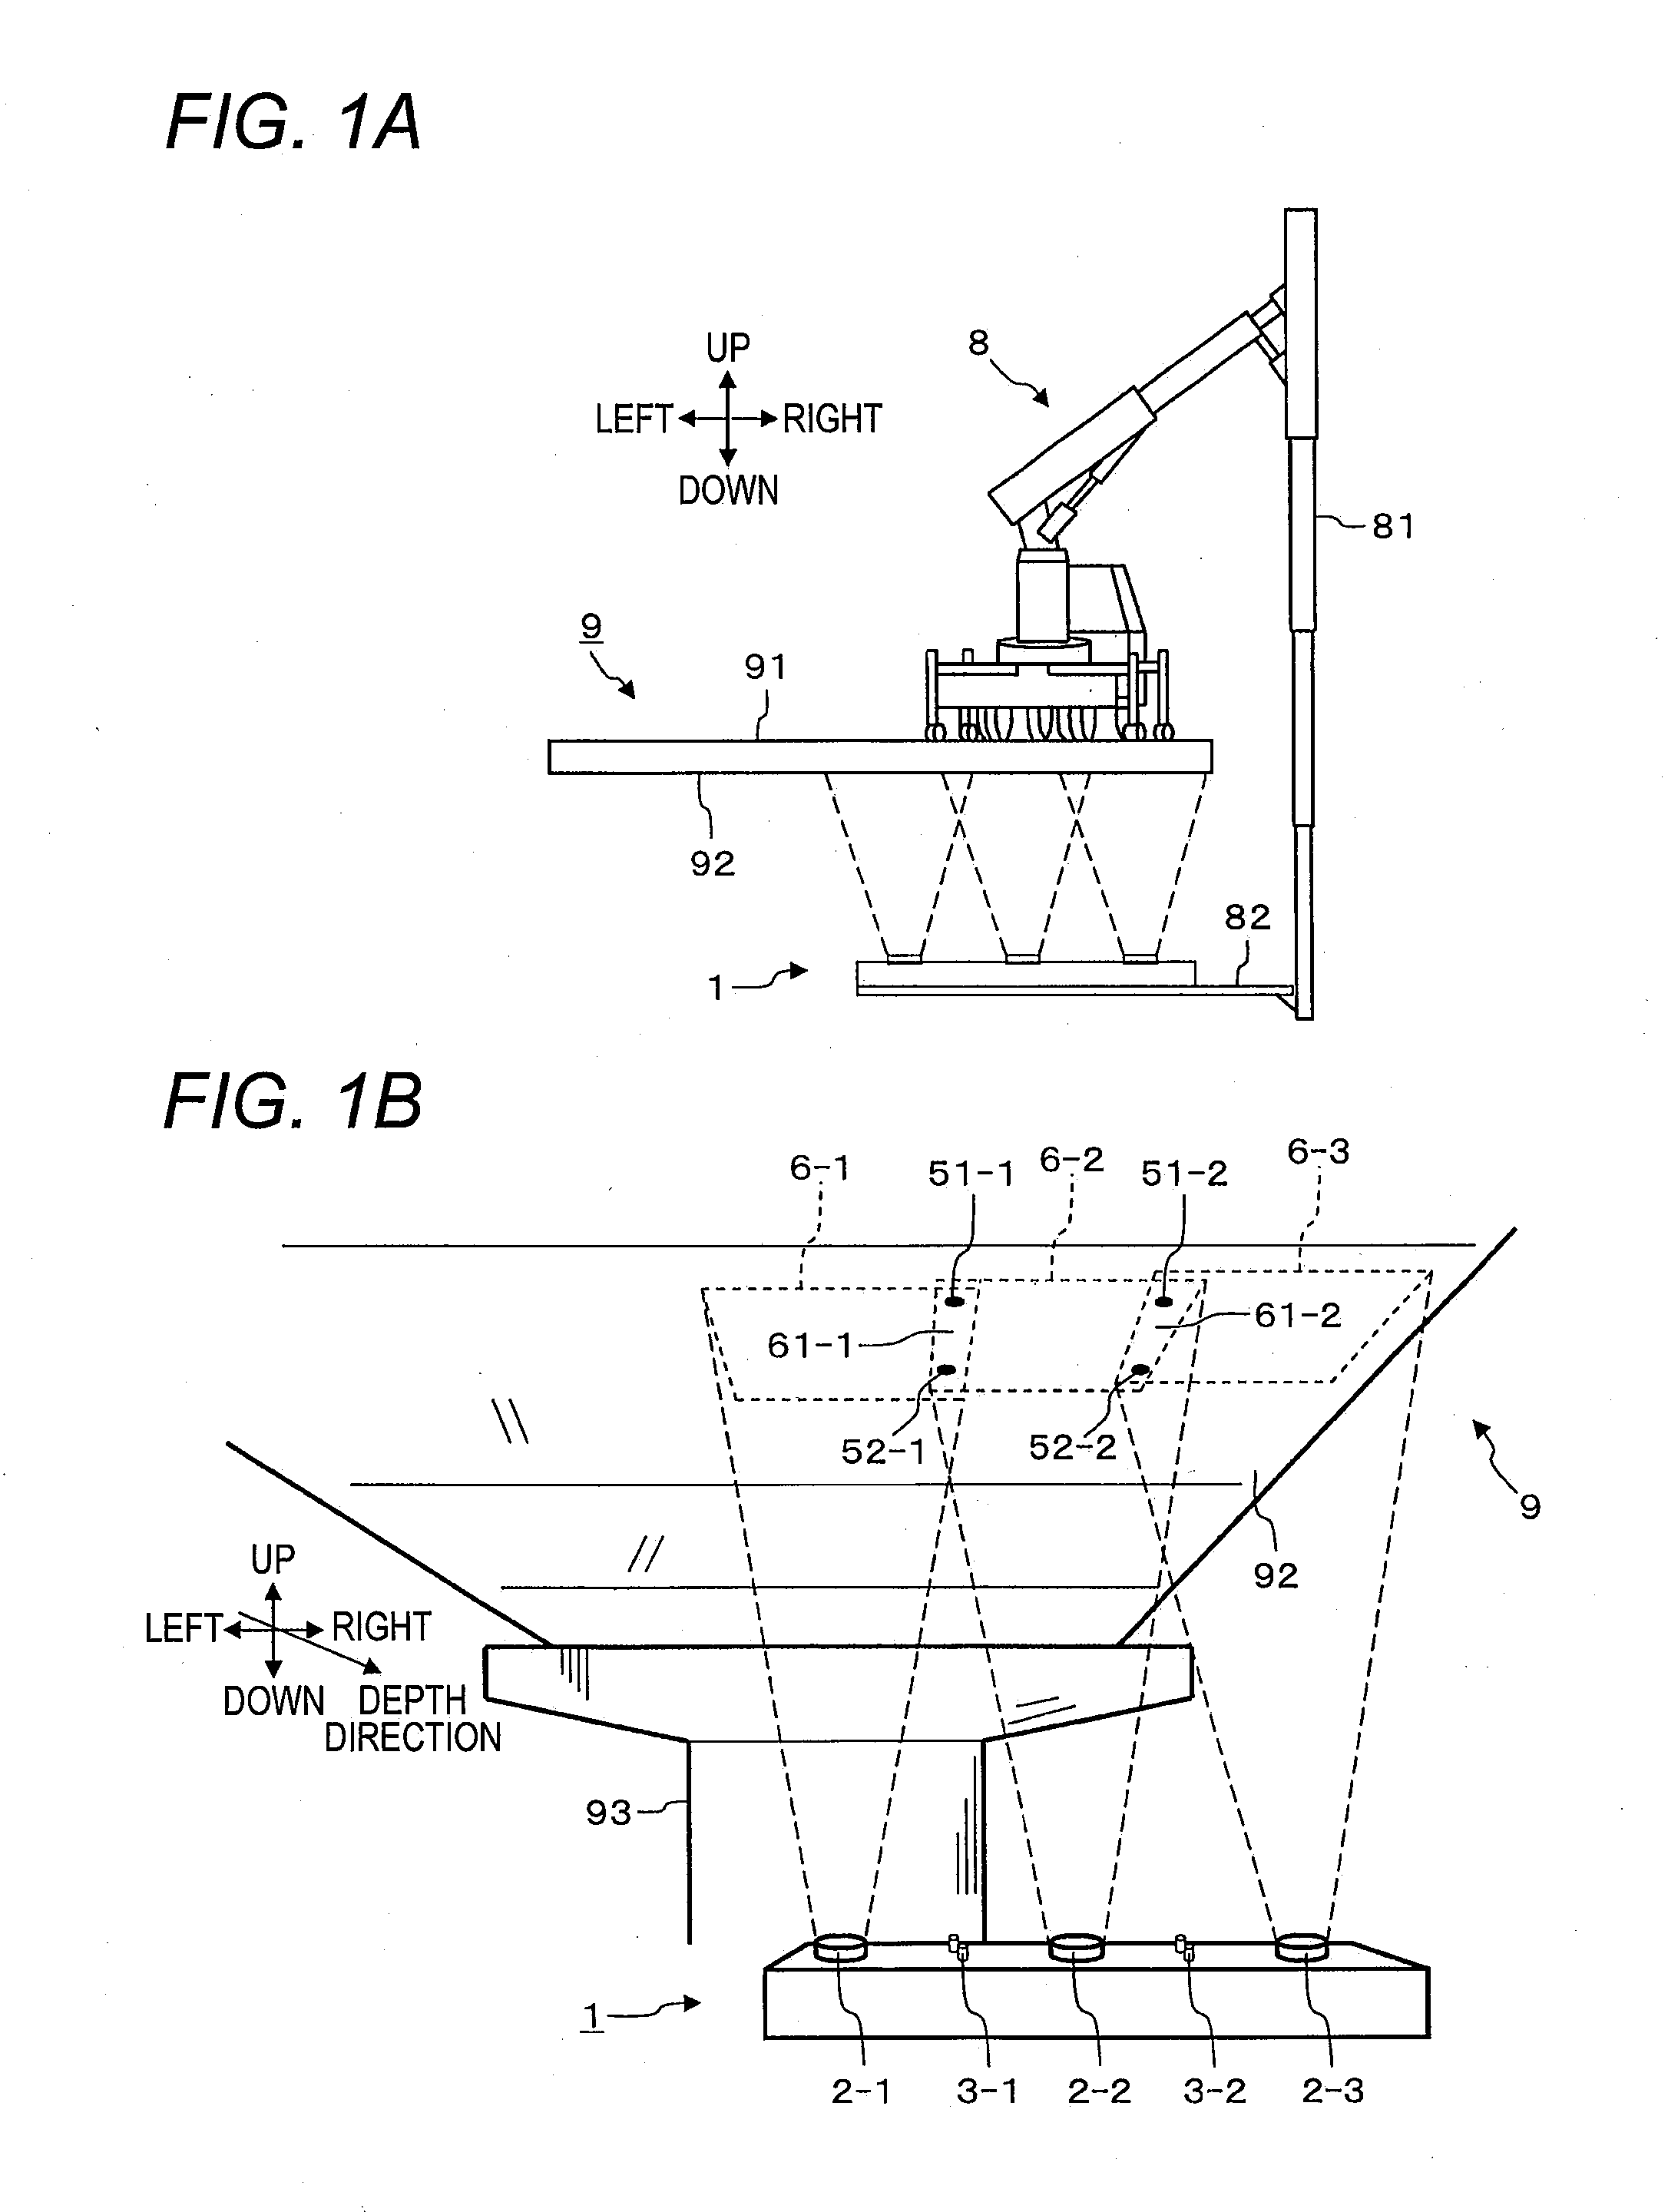 Plural camera images capturing and processing apparatus, and composite imaging method